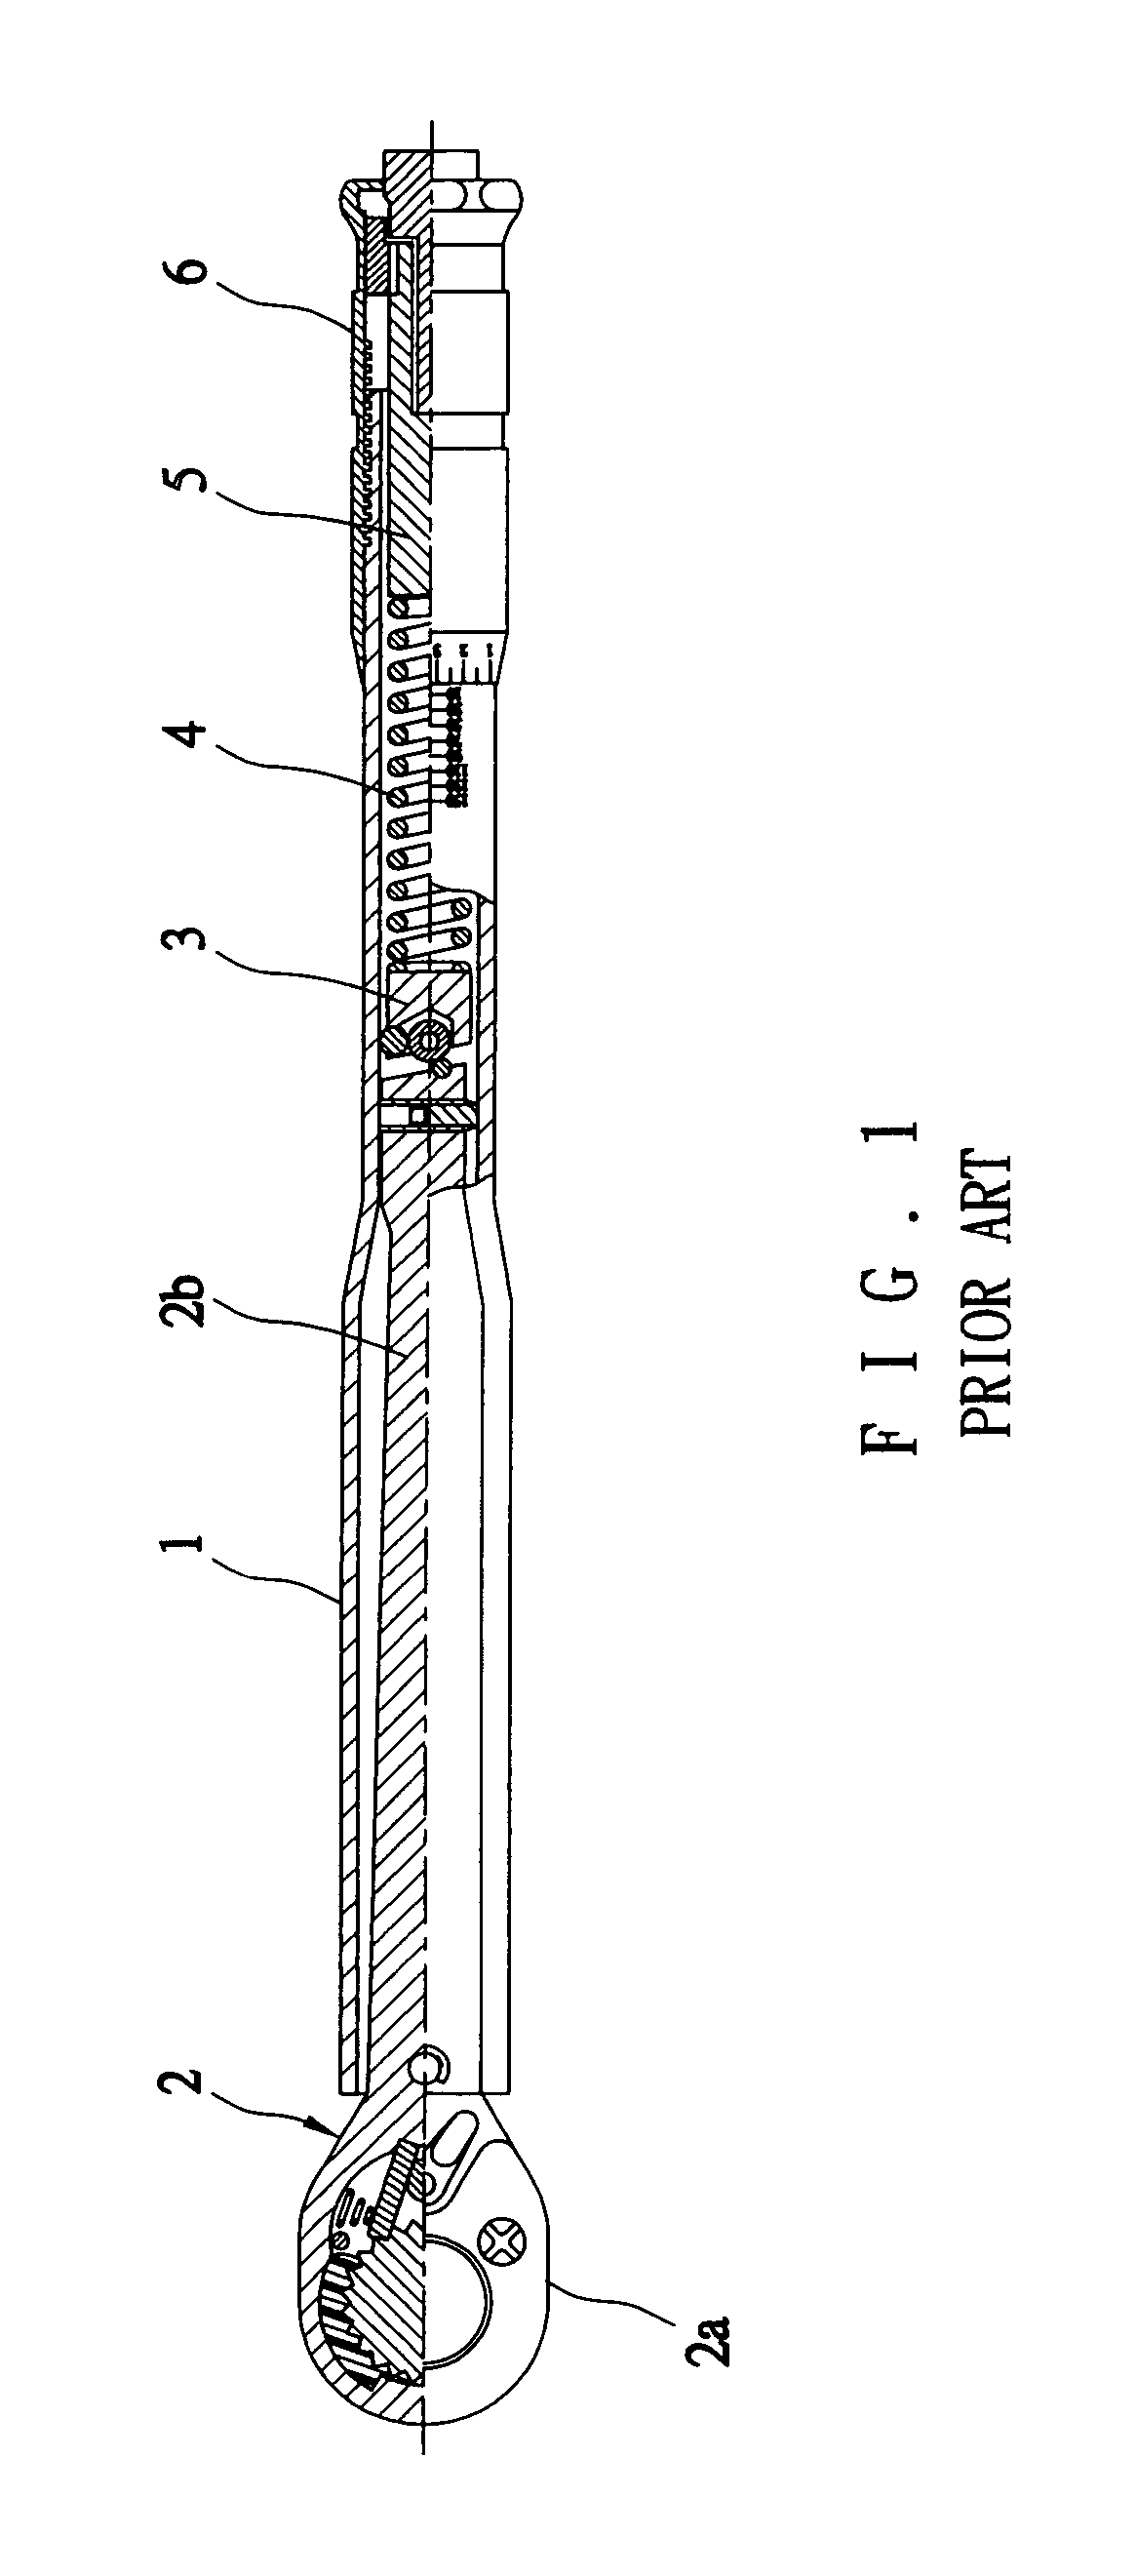 Device for numerically displaying torque of torque wrench having a preset maximum torque